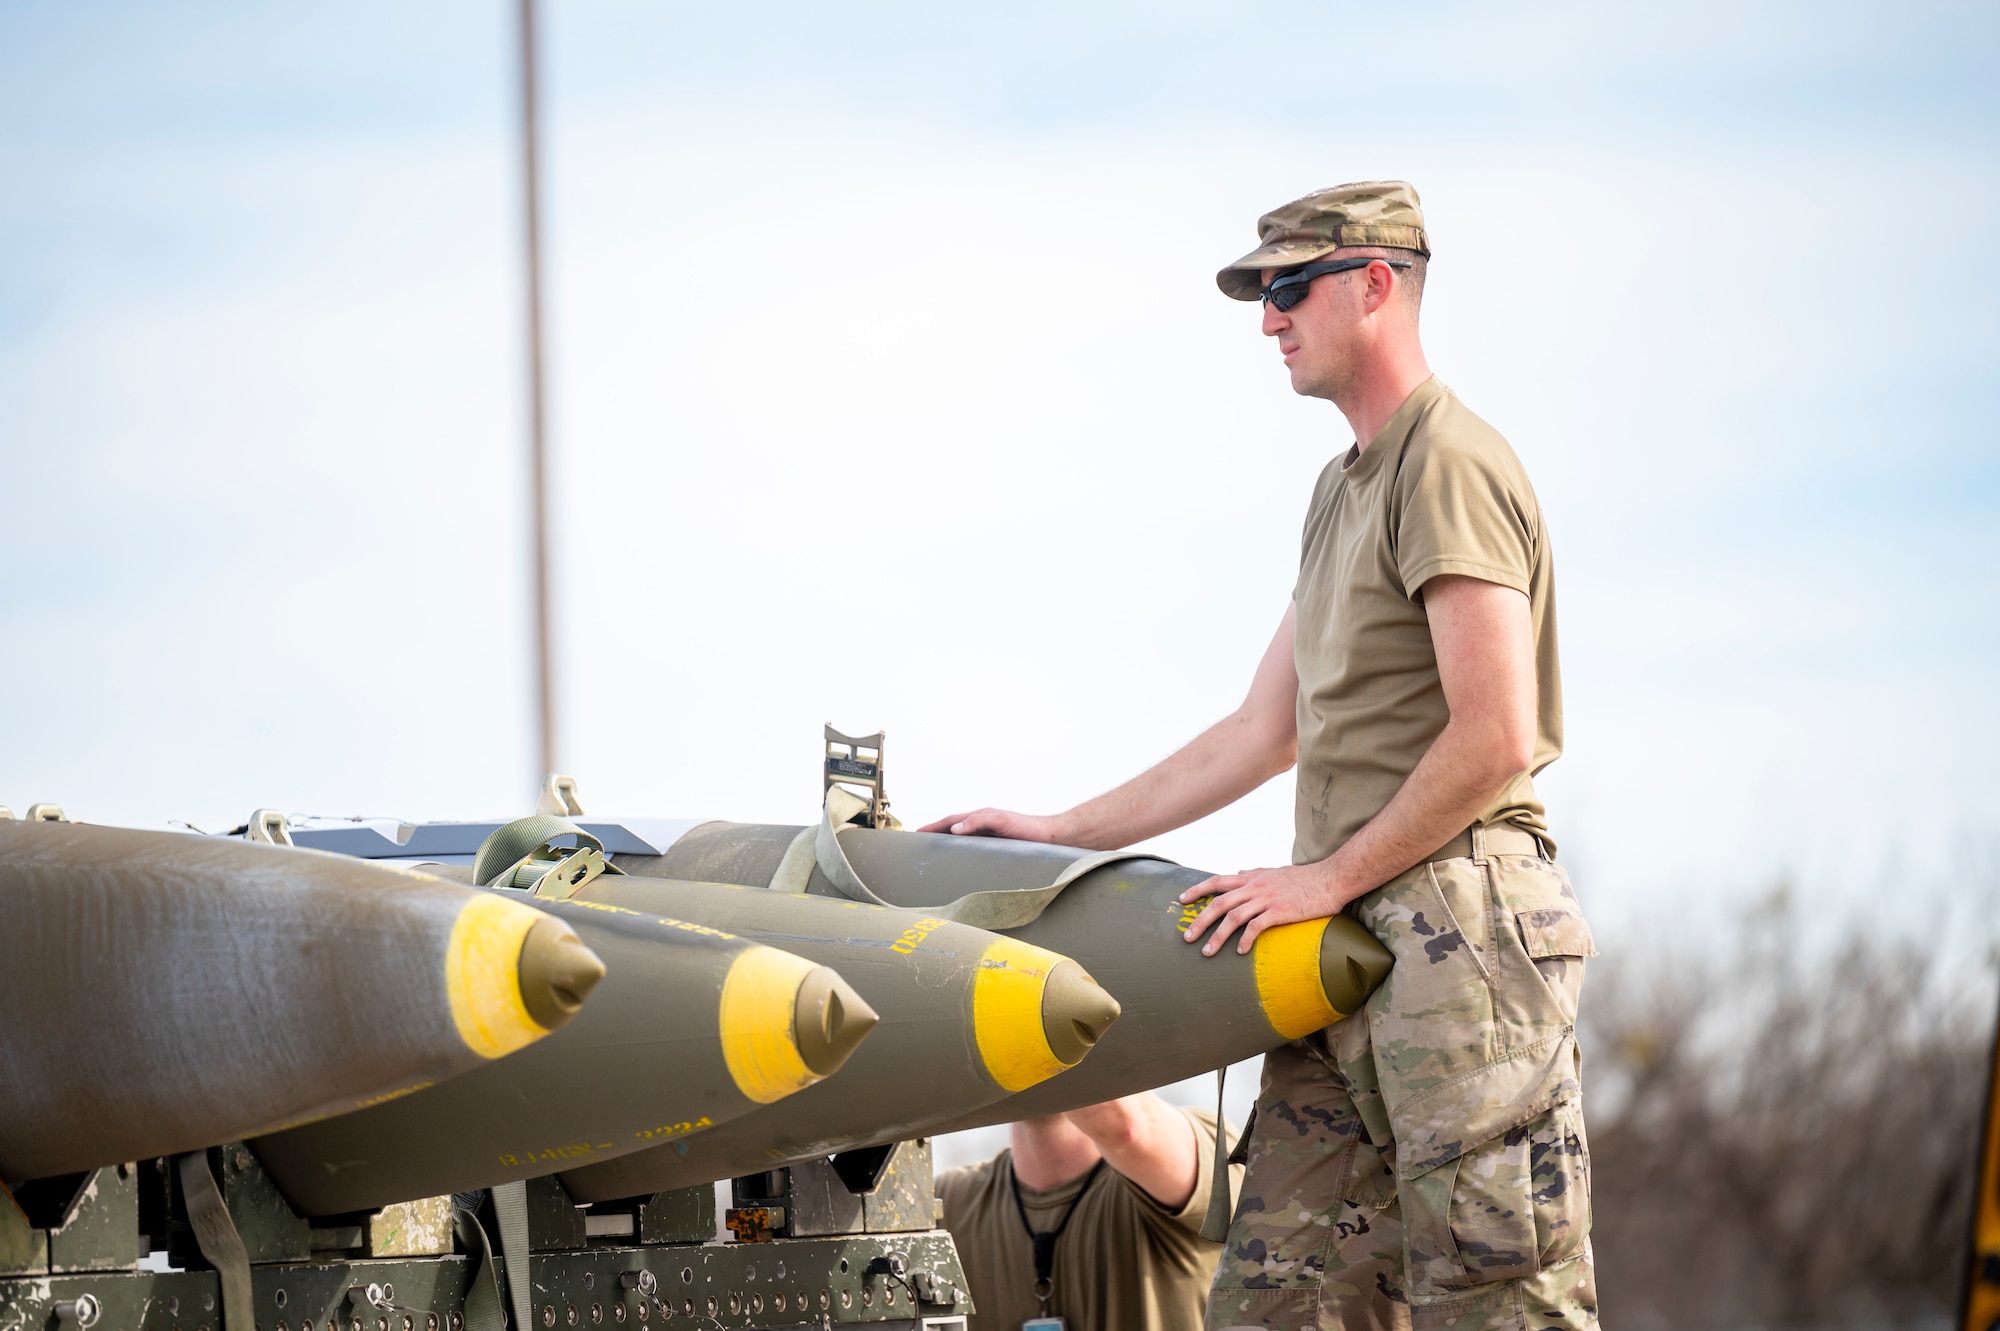 U.S. Air Force Airman, 7th Munitions Conventional Maintenance stockpile supervisor, harnesses down a Joint Direct Attack Munition for transport at Dyess Air Force Base, Texas, Jan. 31, 2024. Ellsworth Air Force Base B-1Bs recently launched from Dyess Air Force Base to support U.S. Central Command priorities, validating the United States Air Force capability to provide precision, long-range strike anytime, anywhere. (U.S. Air Force photo by Senior Airman Leon Redfern)